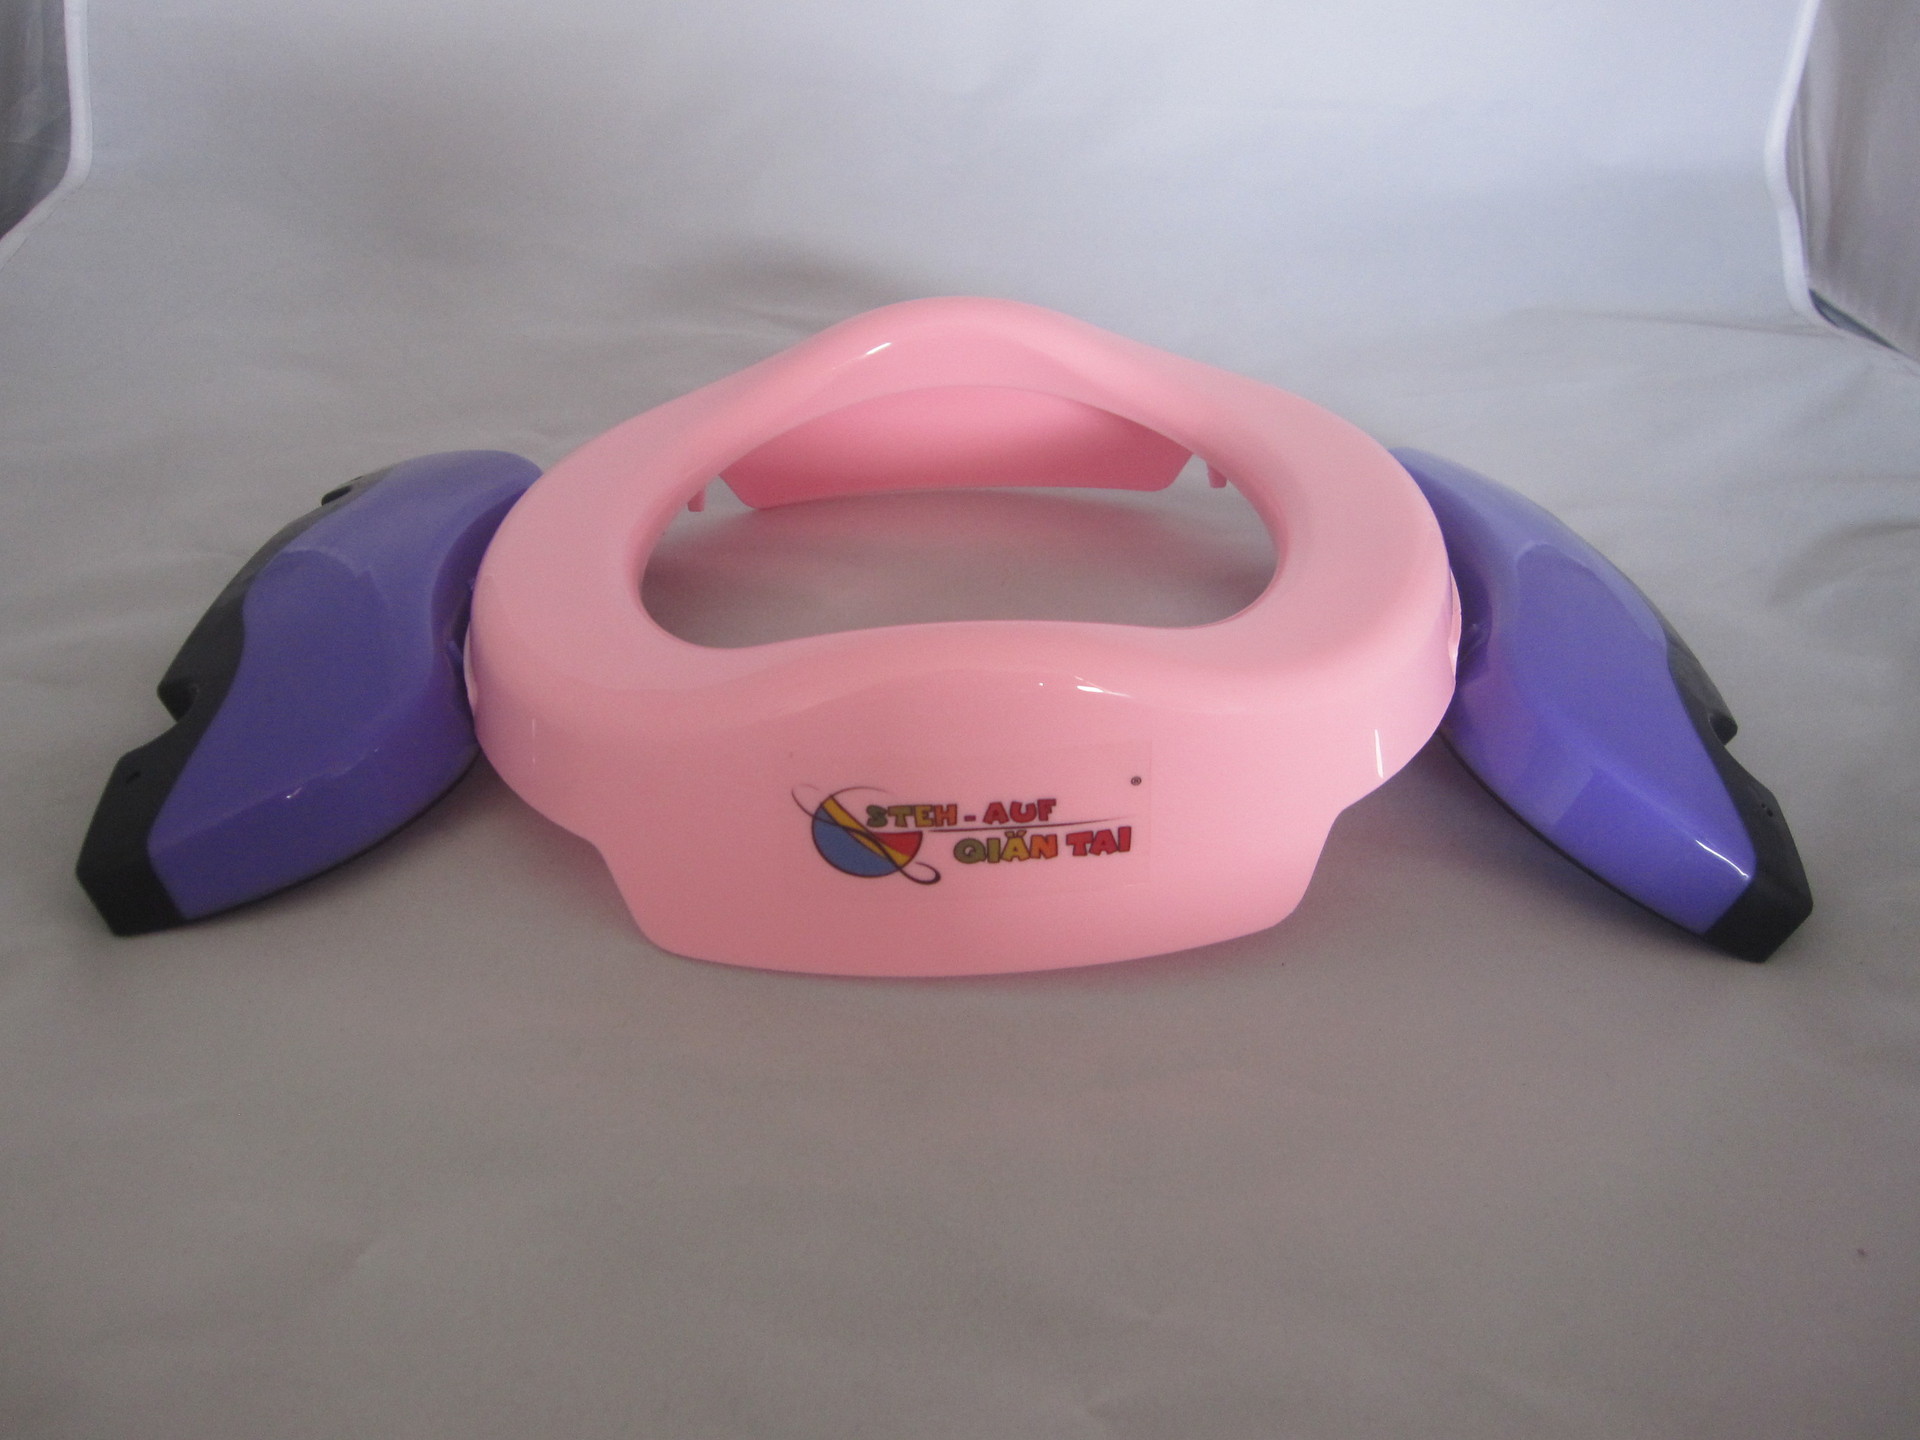 Portable Babies Potty Toilet Training Cushion Child Seat with Handles